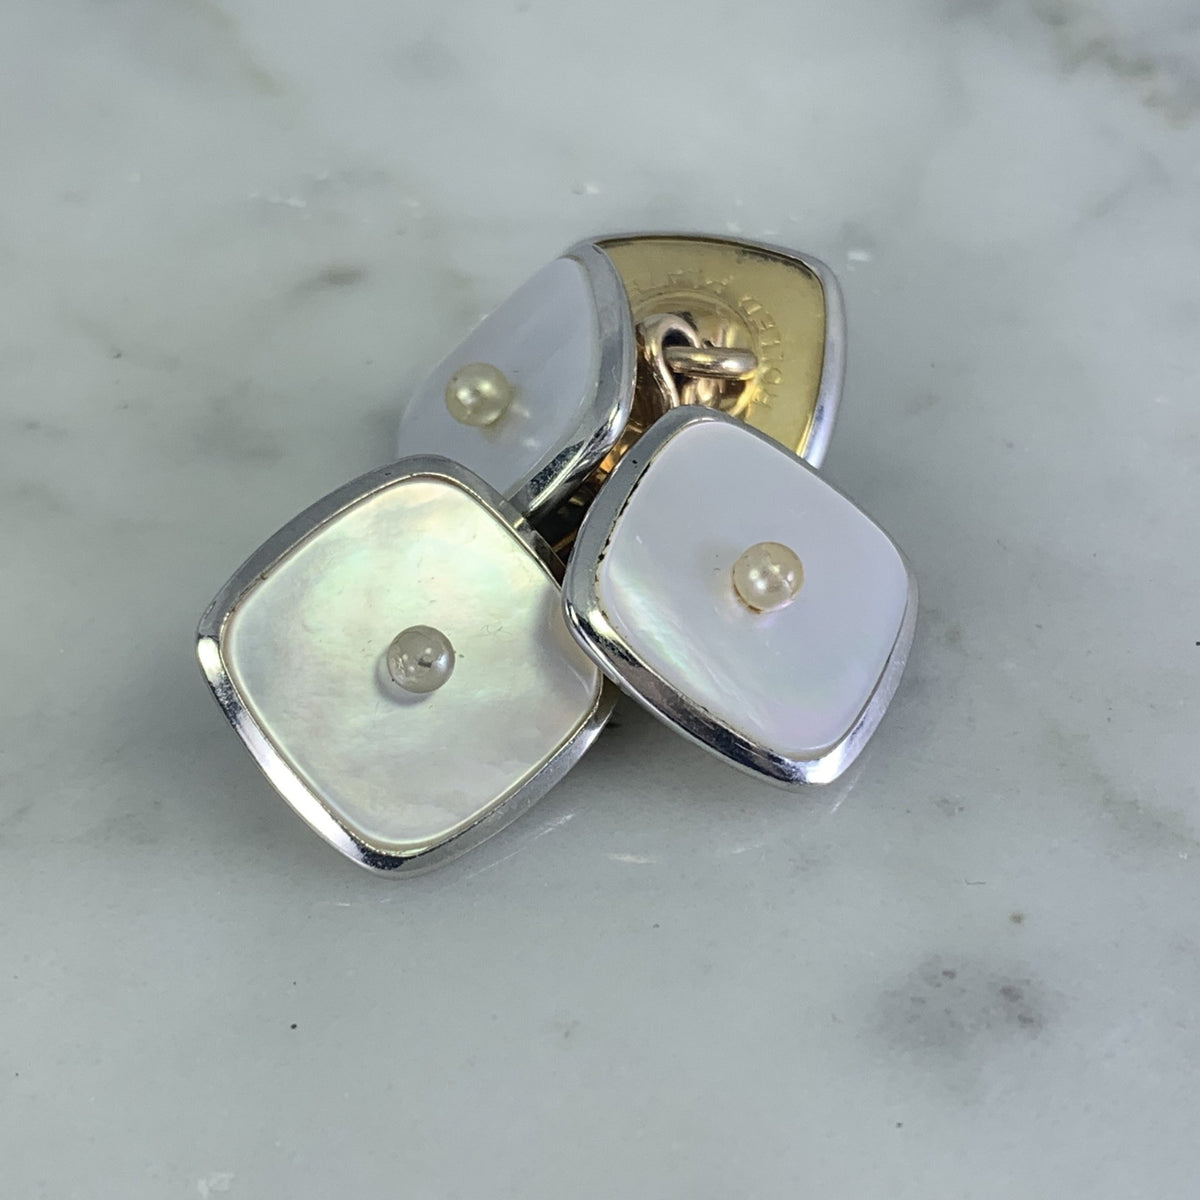 Antique Art Deco Cufflinks and Tuxedo Stud Set in Mother of Pearl